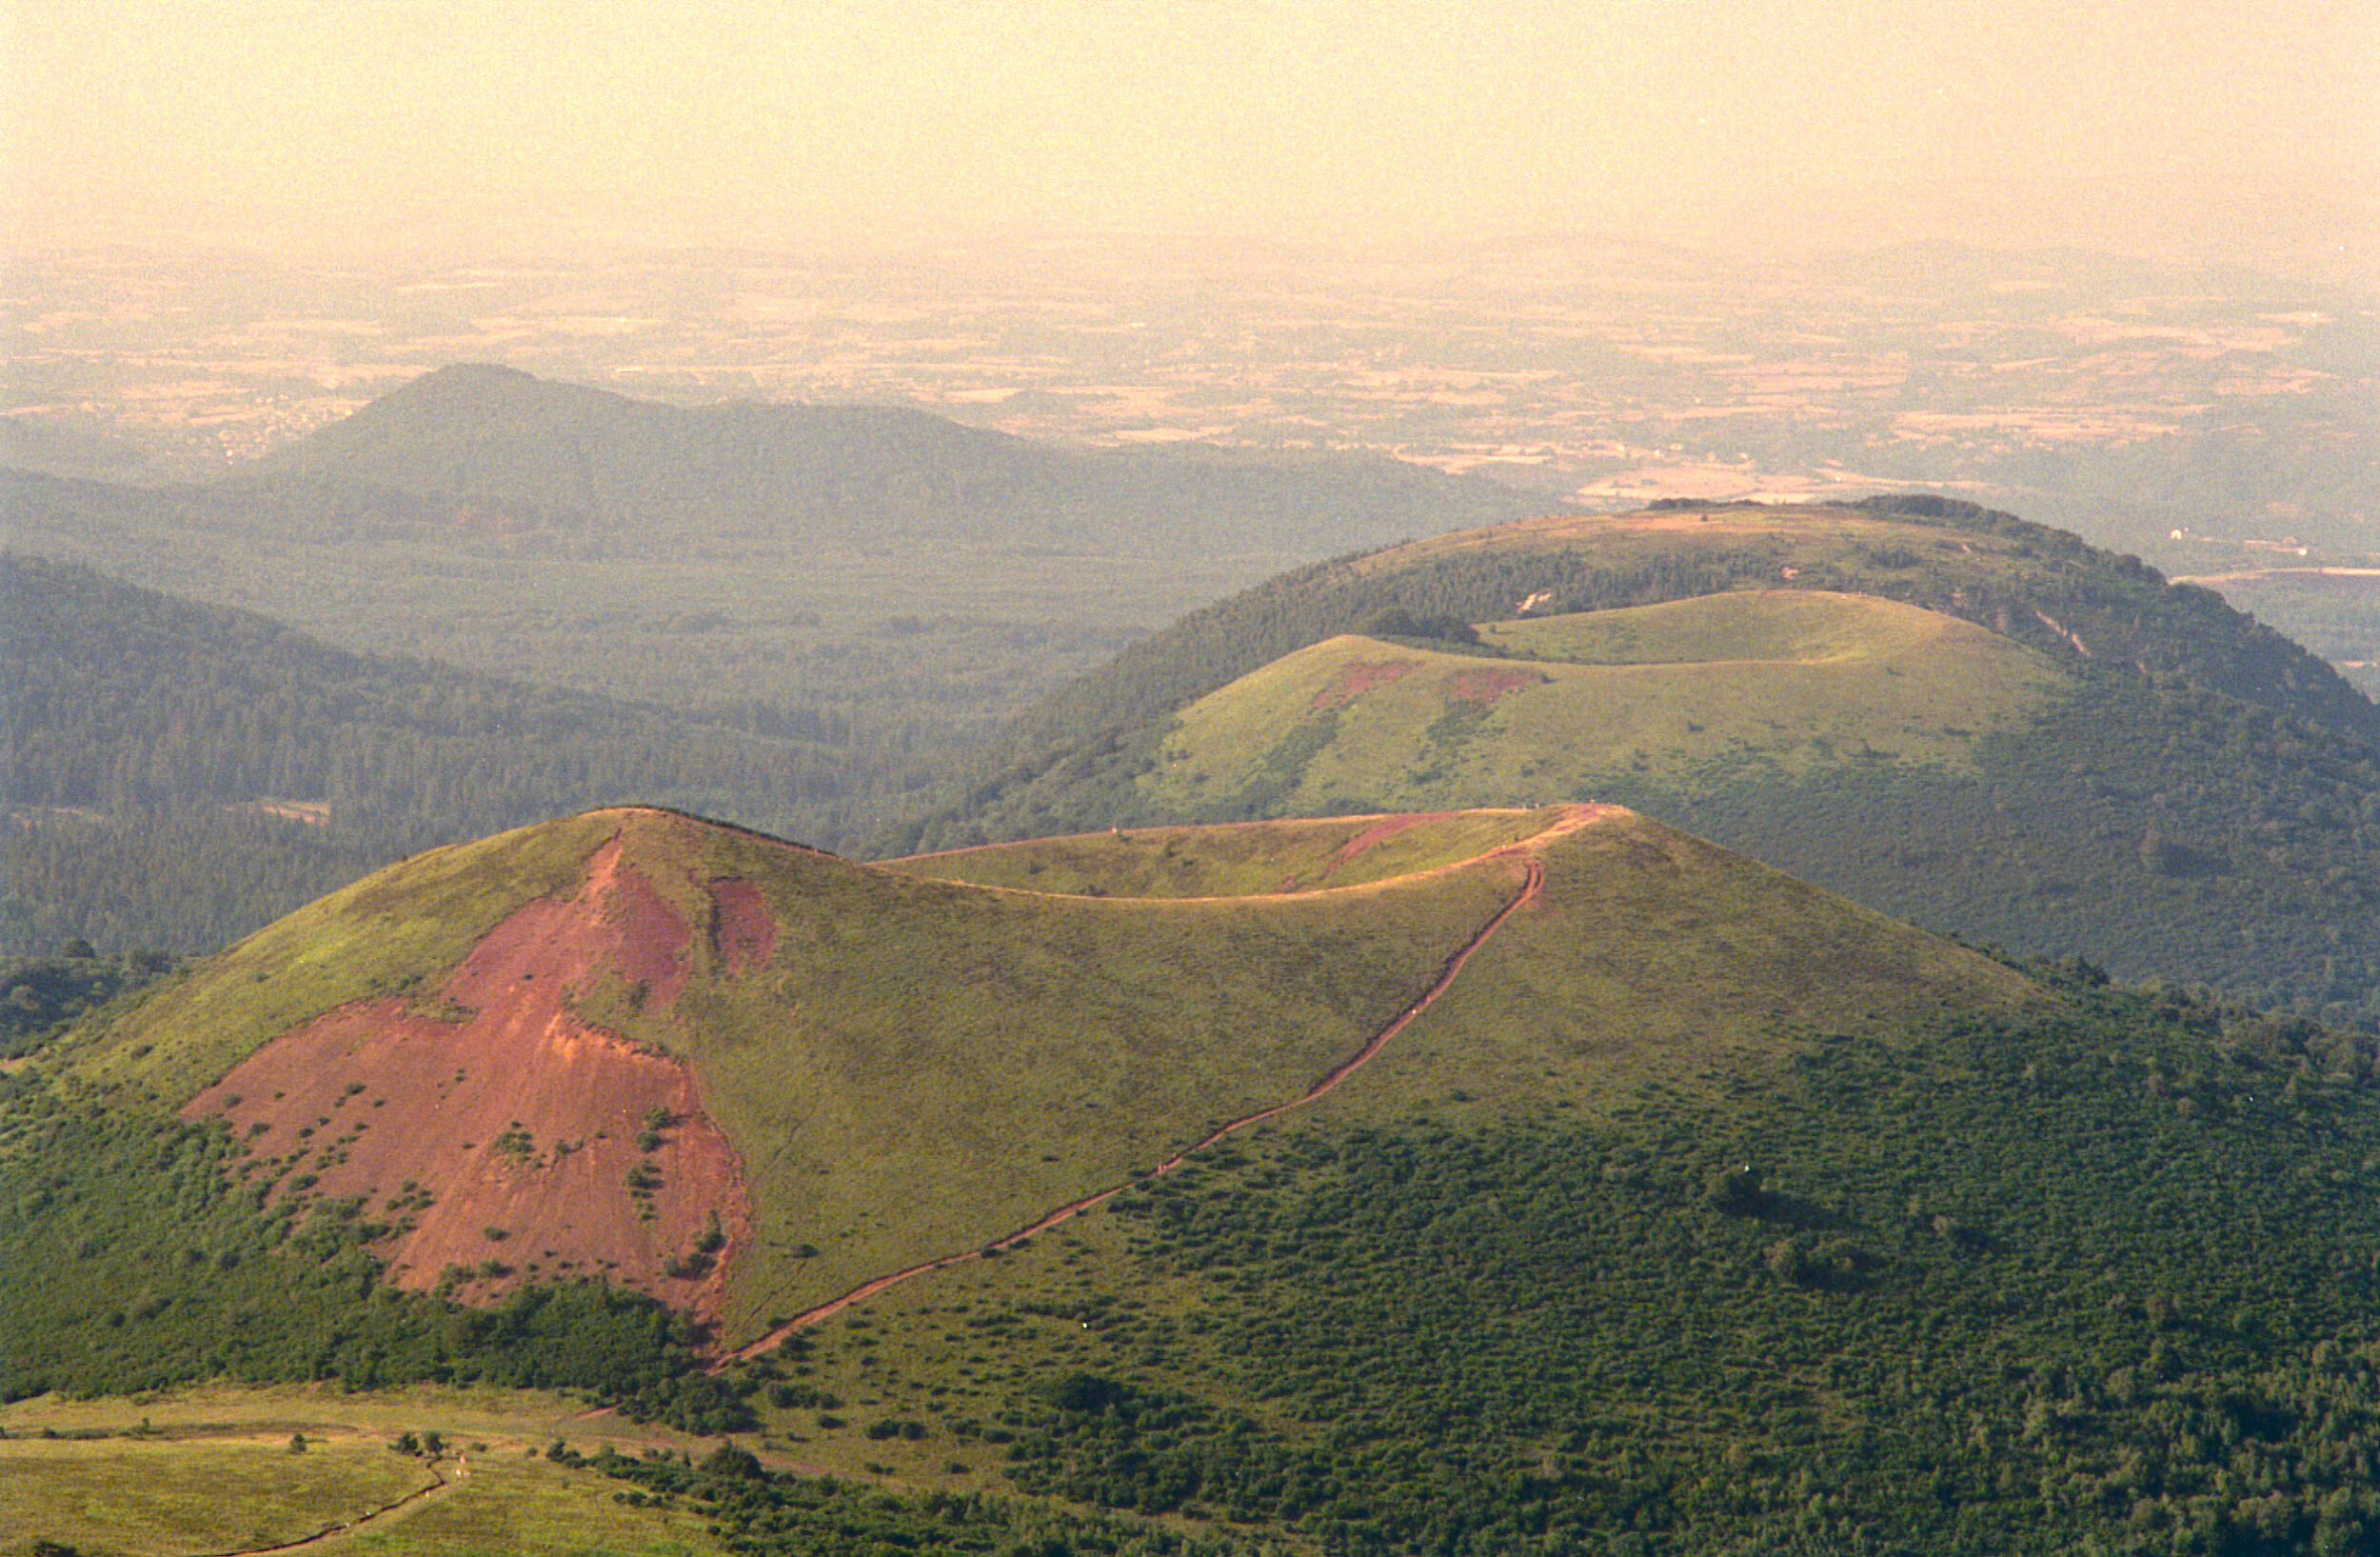 Volcanos in Mont Dore, France (date unknown)